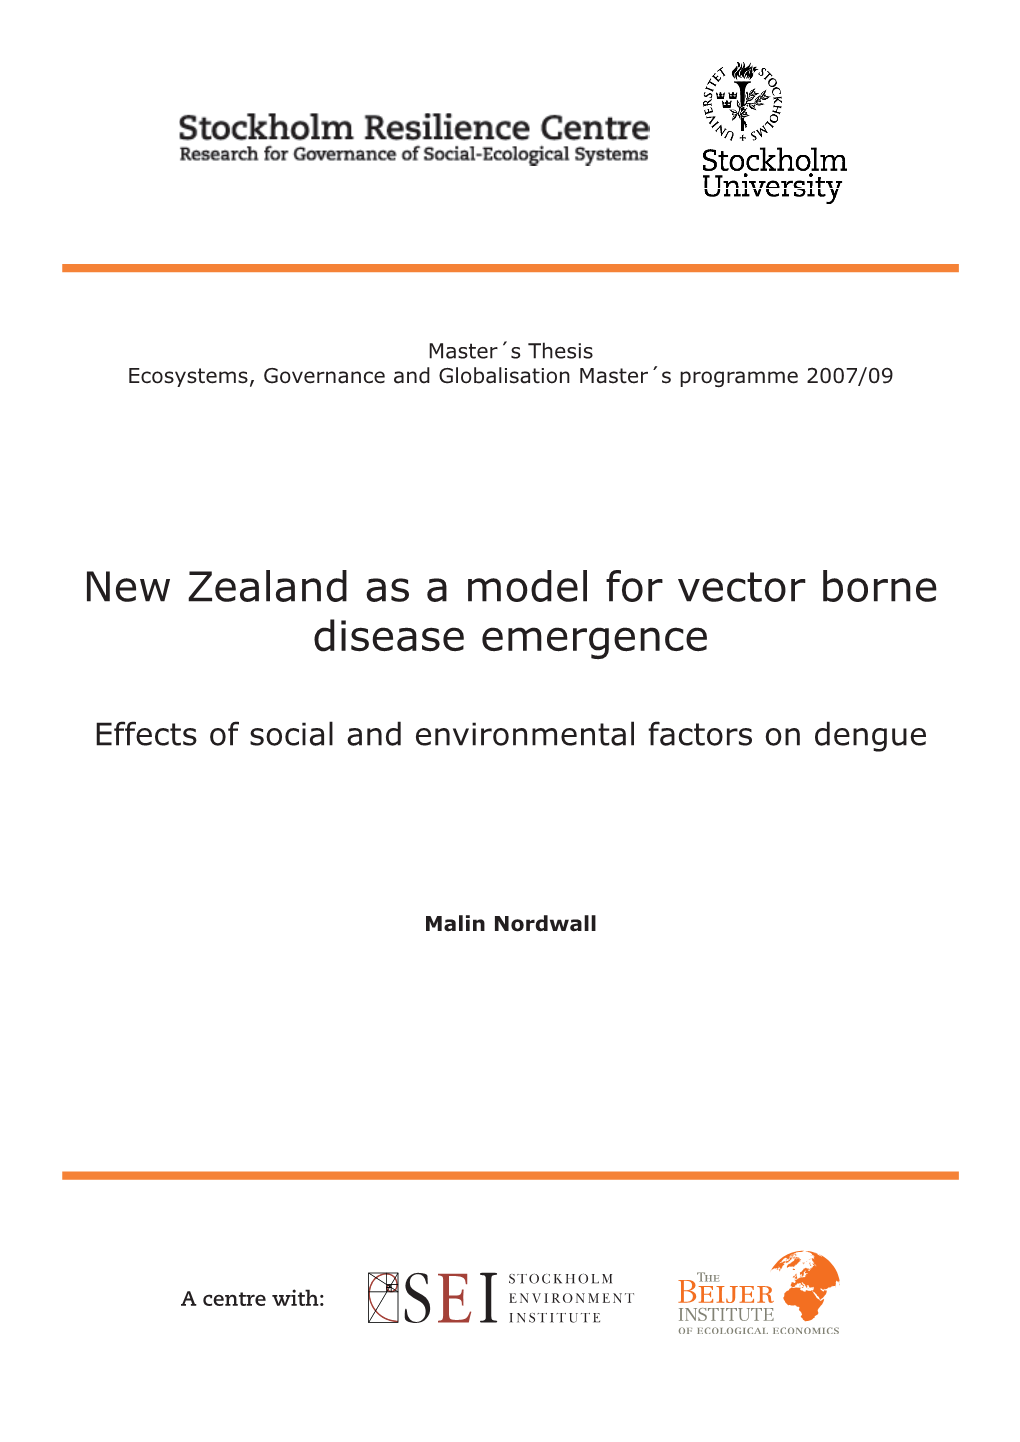 New Zealand As a Model for Vector Borne Disease Emergence